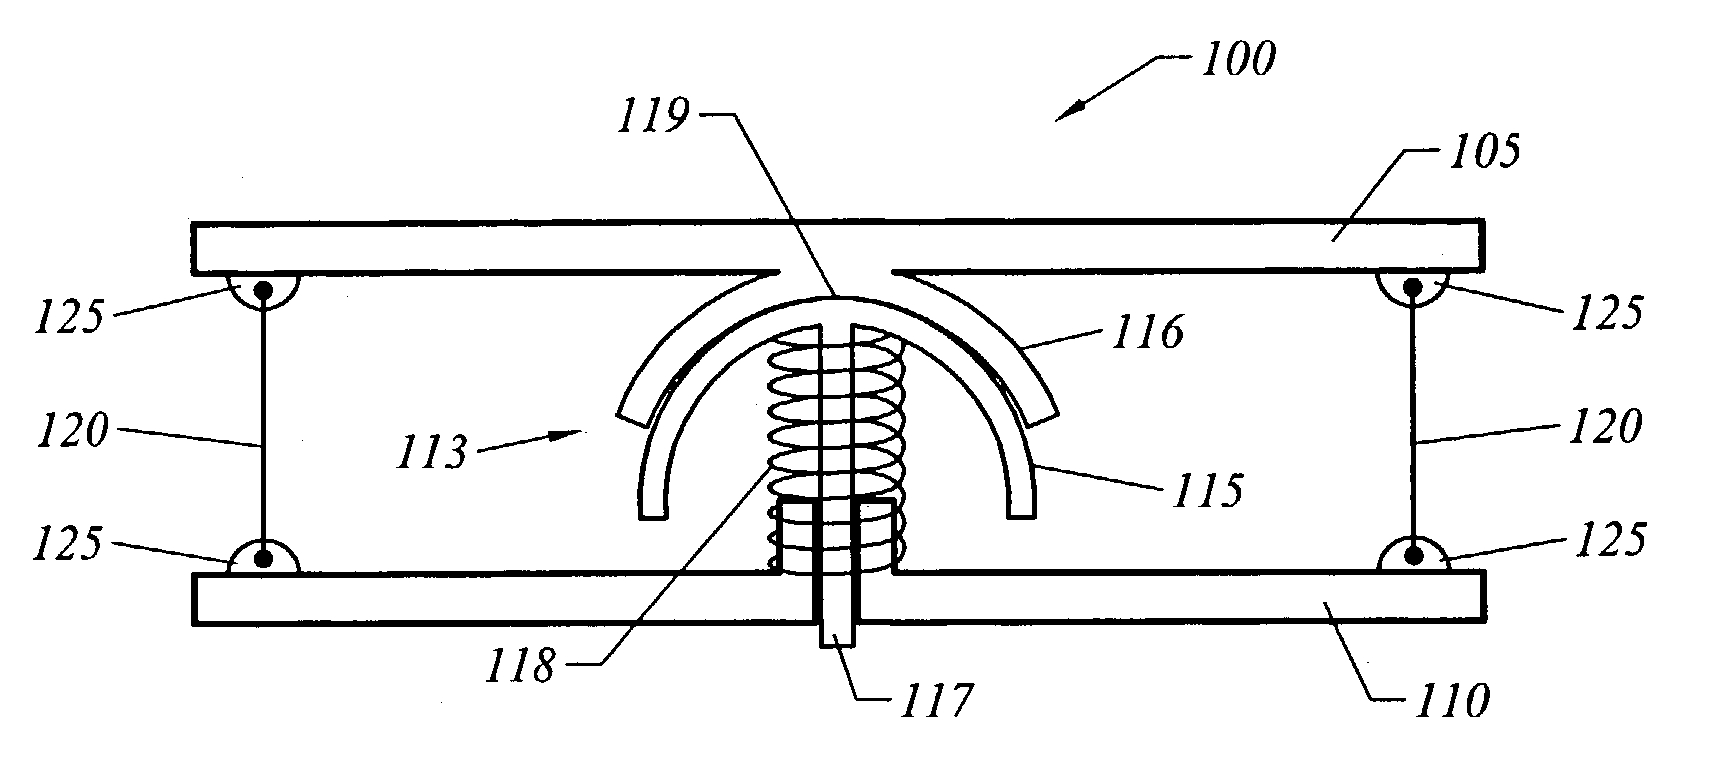 Actuator for two angular degrees of freedom